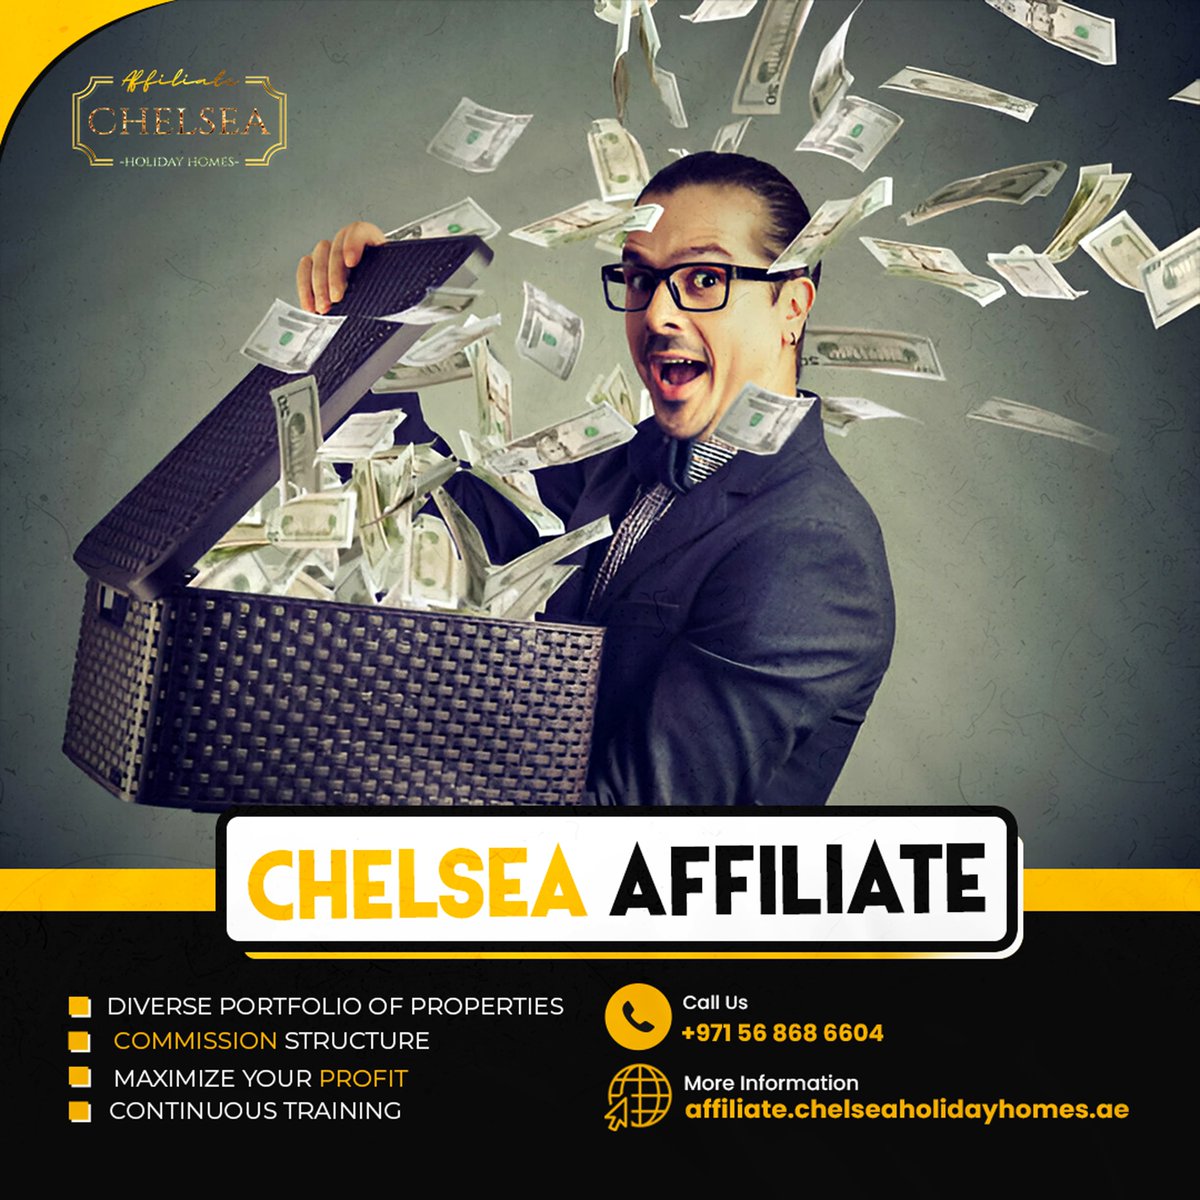 Exciting Opportunity Alert! Join the Chelsea Holiday Homes Affiliate Program in Dubai! 

DM us today to learn more and start your journey towards a brighter future.  

#ChelseaHolidayHomes #AffiliateProgram #DubaiRealEstate #DreamBigEarnBig